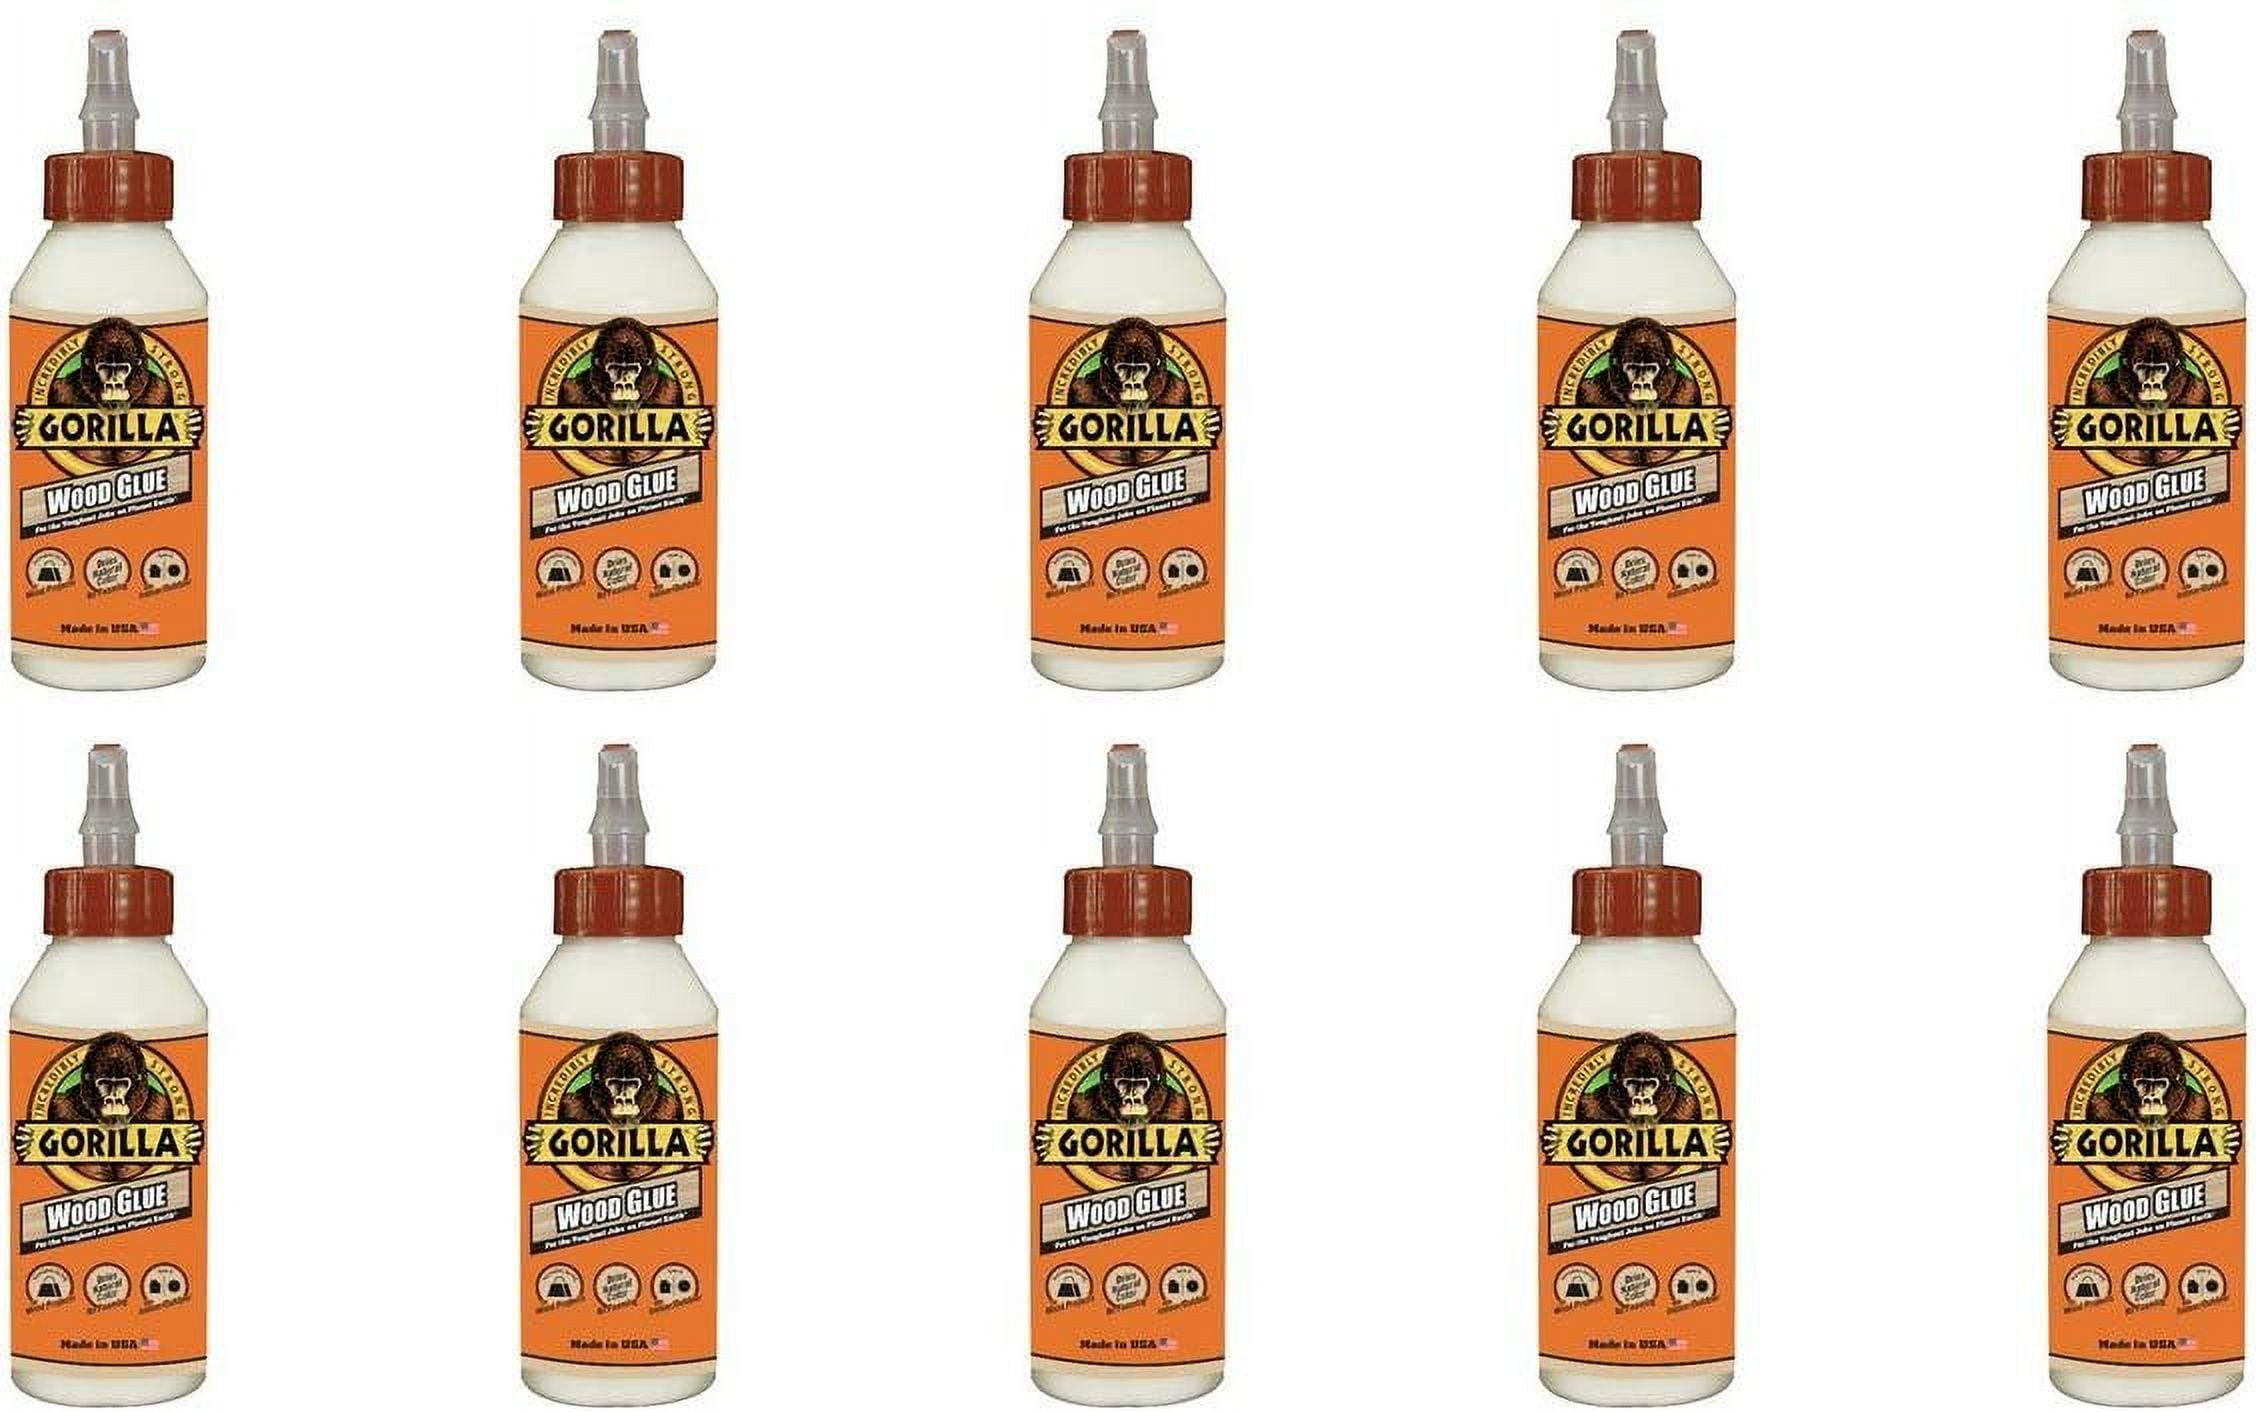 6 Best Wood Glue Reviews: Extra Strong Glue for Woodworking & Hobbies